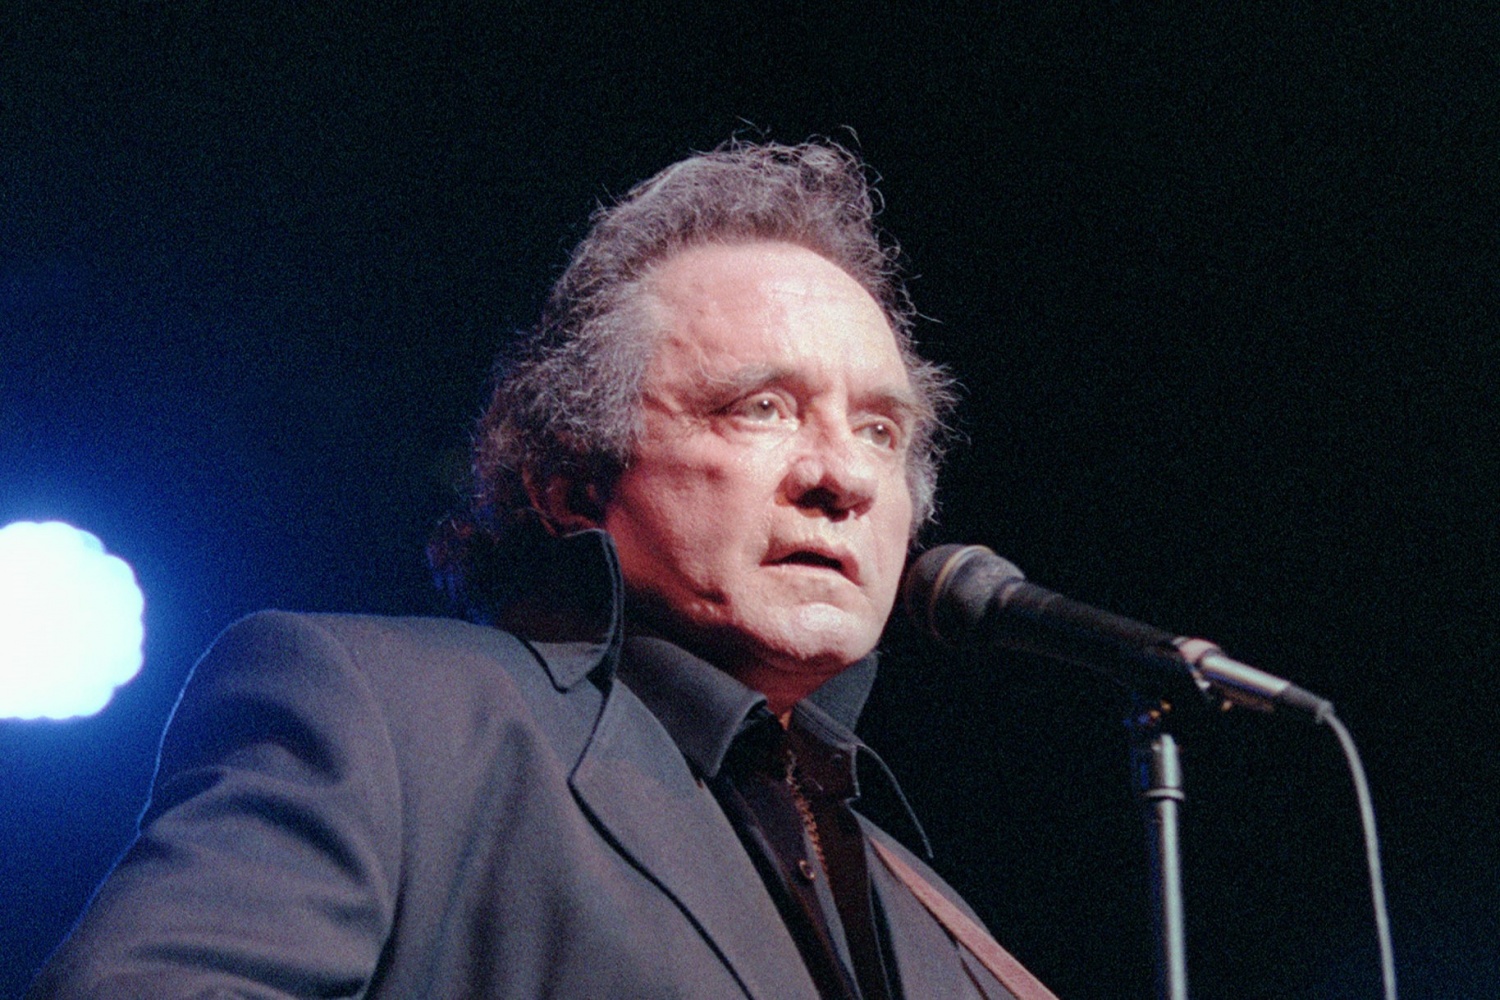 Johnny Cash's Death Anniversary: Late Singer's Son Pays Tribute to Patriarch in Heartfelt Essay